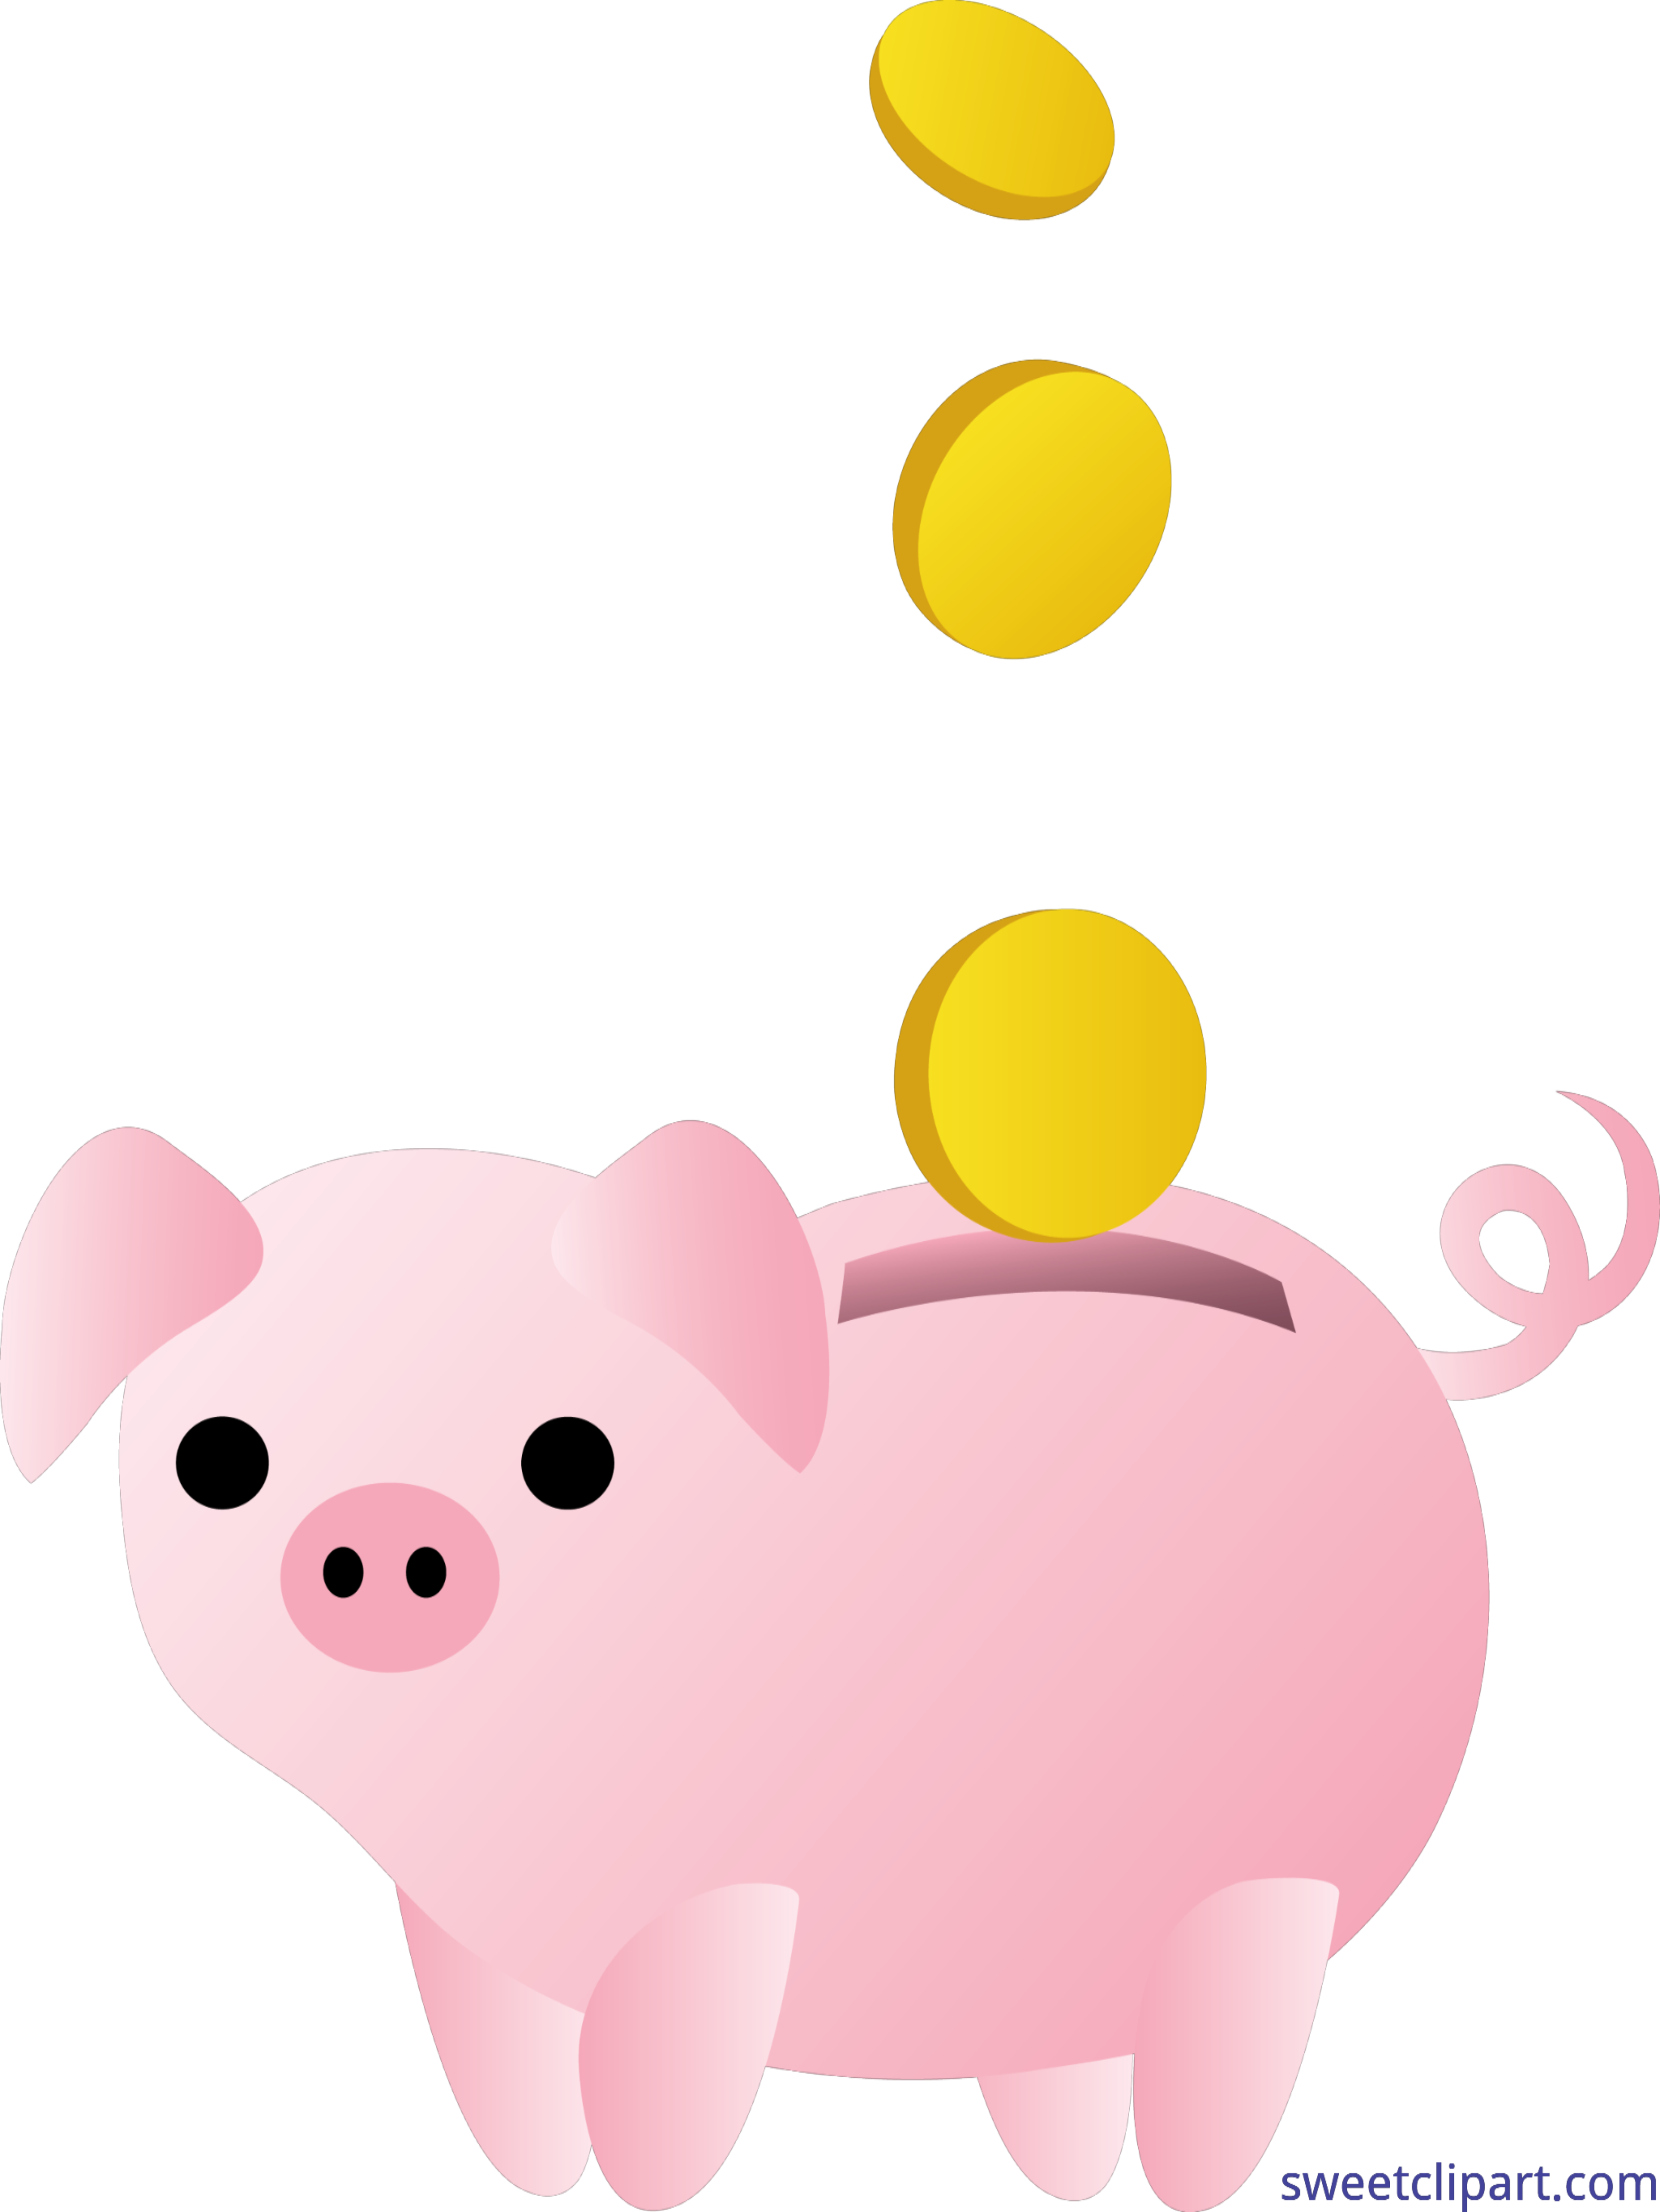 Piggy bank with coins. Finance clipart business finance